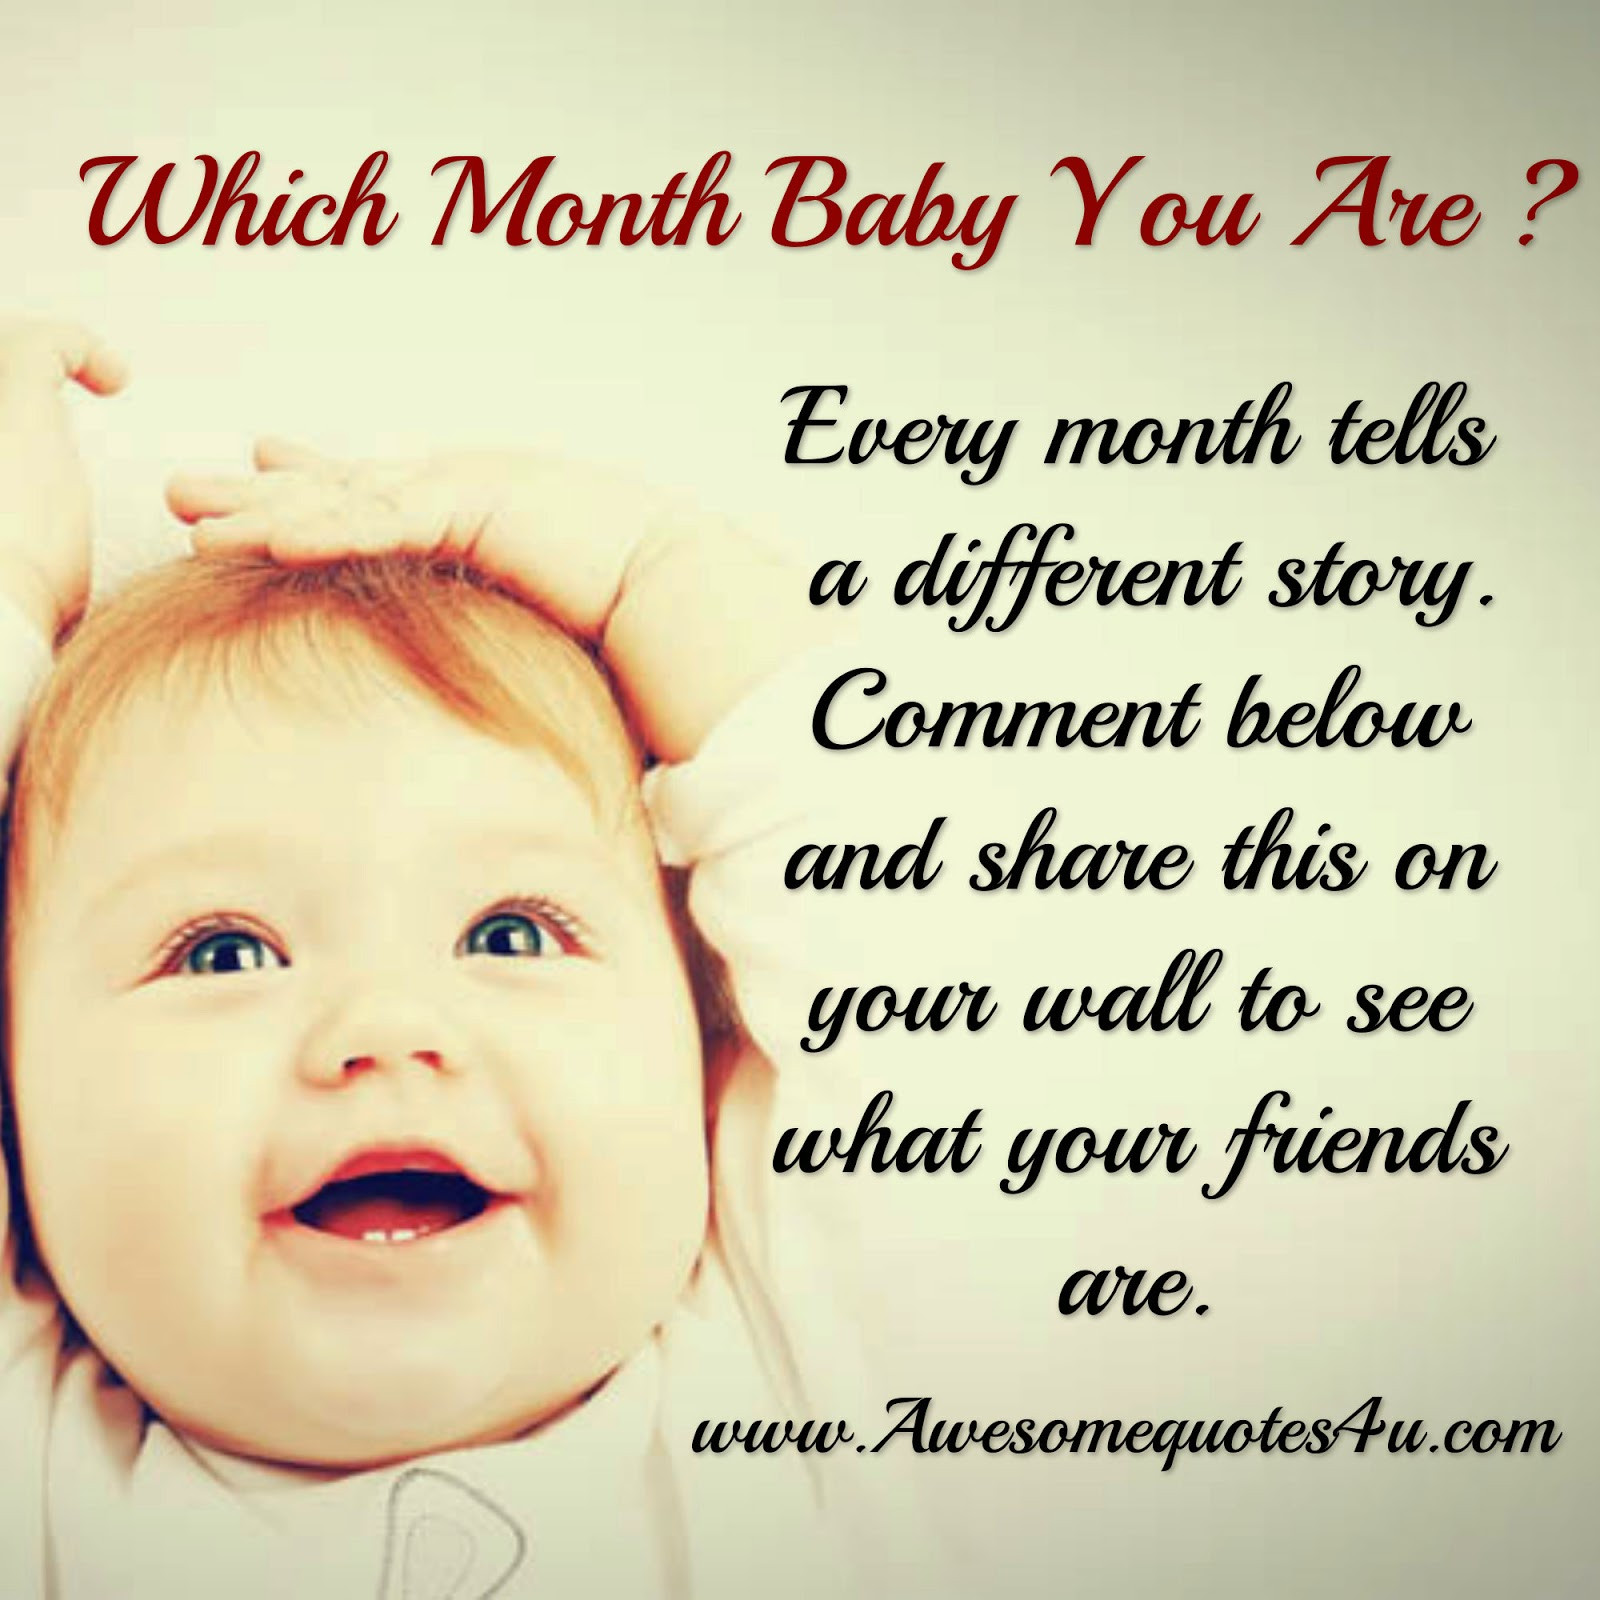 4 Months Old Baby Quotes
 Awesome Quotes What Month Baby Are You Every Month Tells